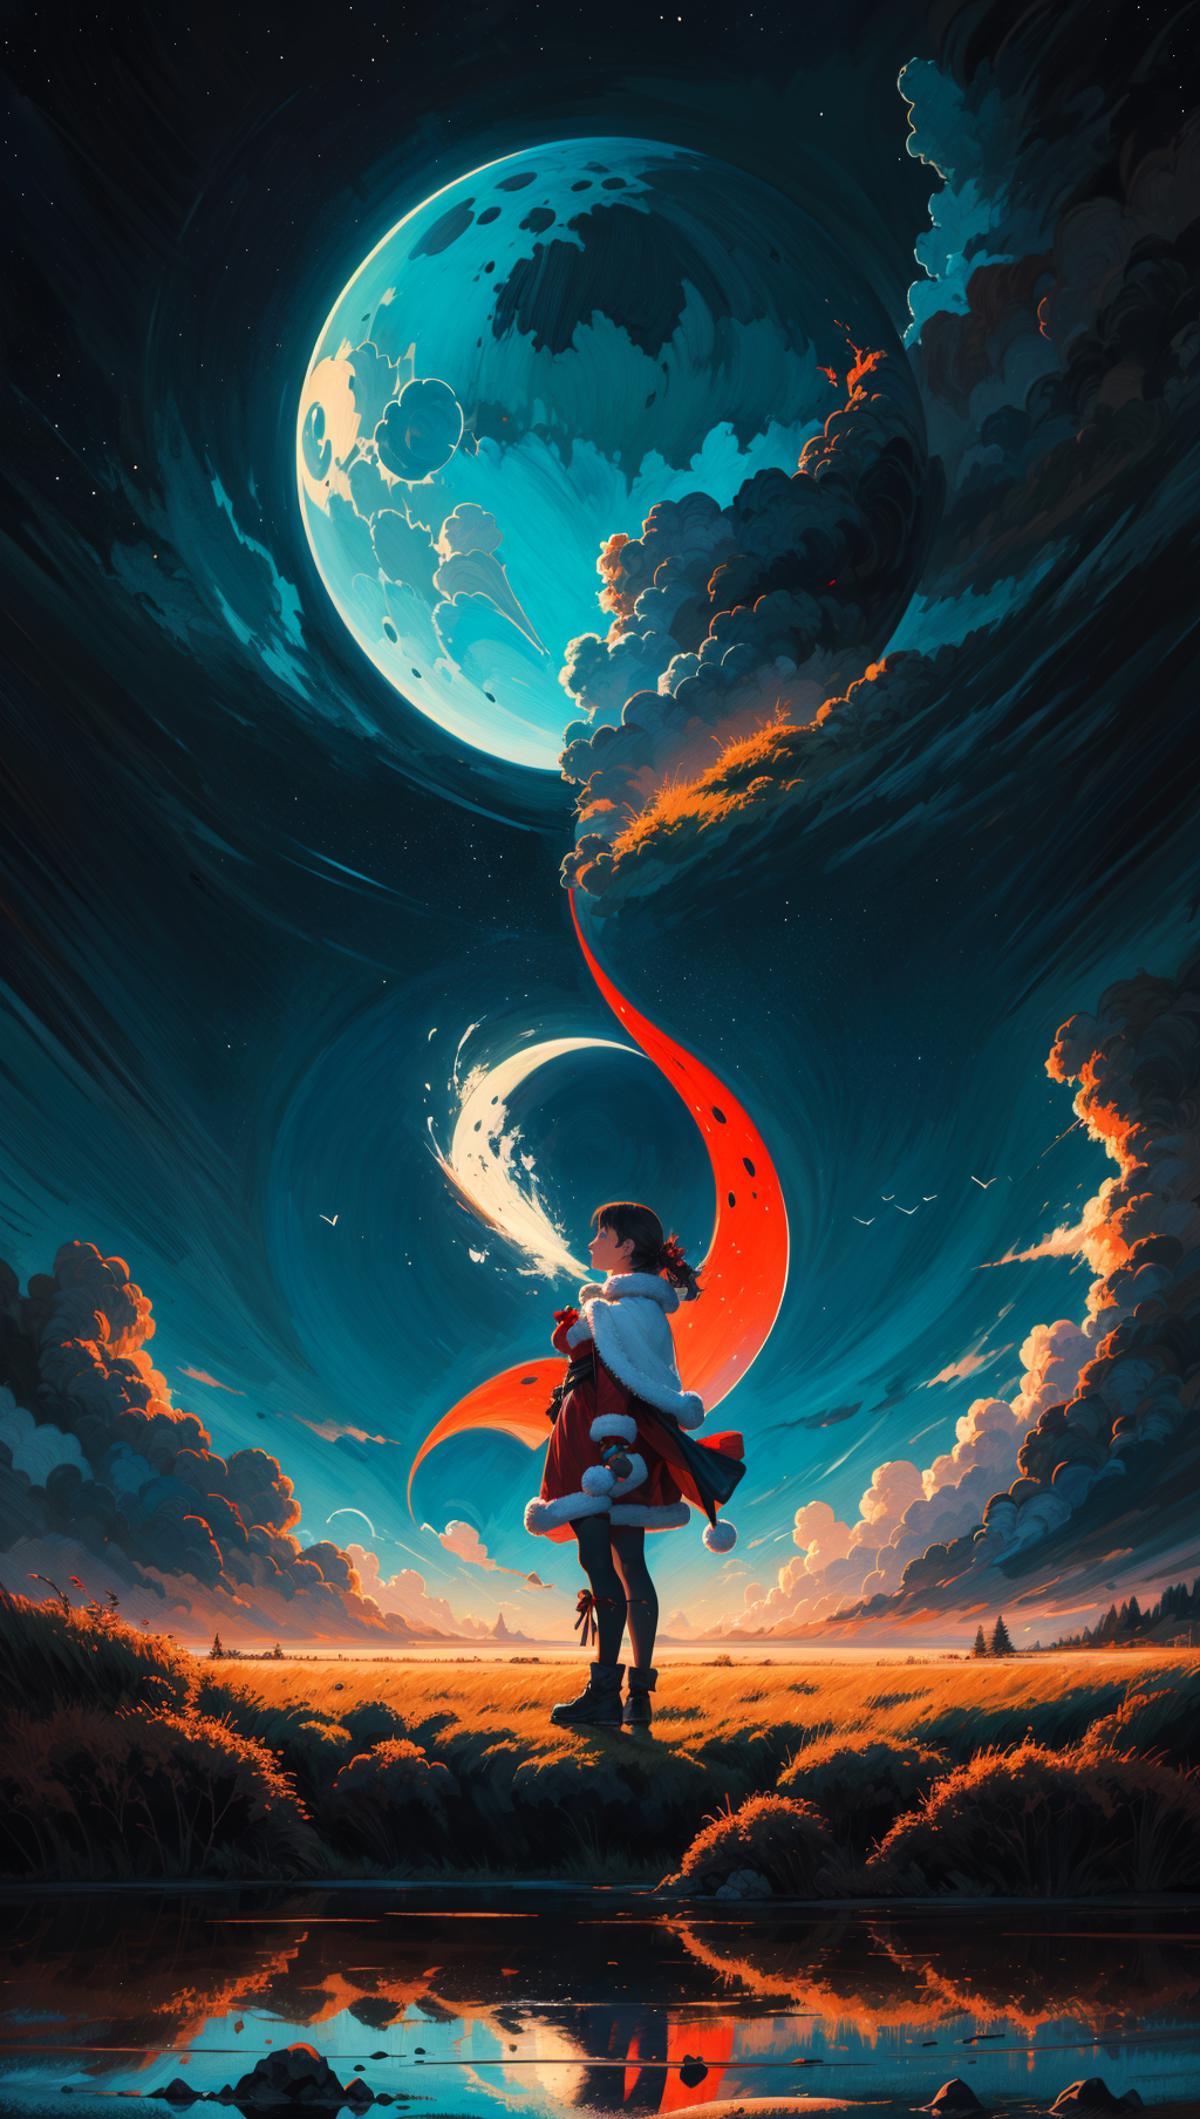 A woman in a red dress stands in front of a moon and clouds.